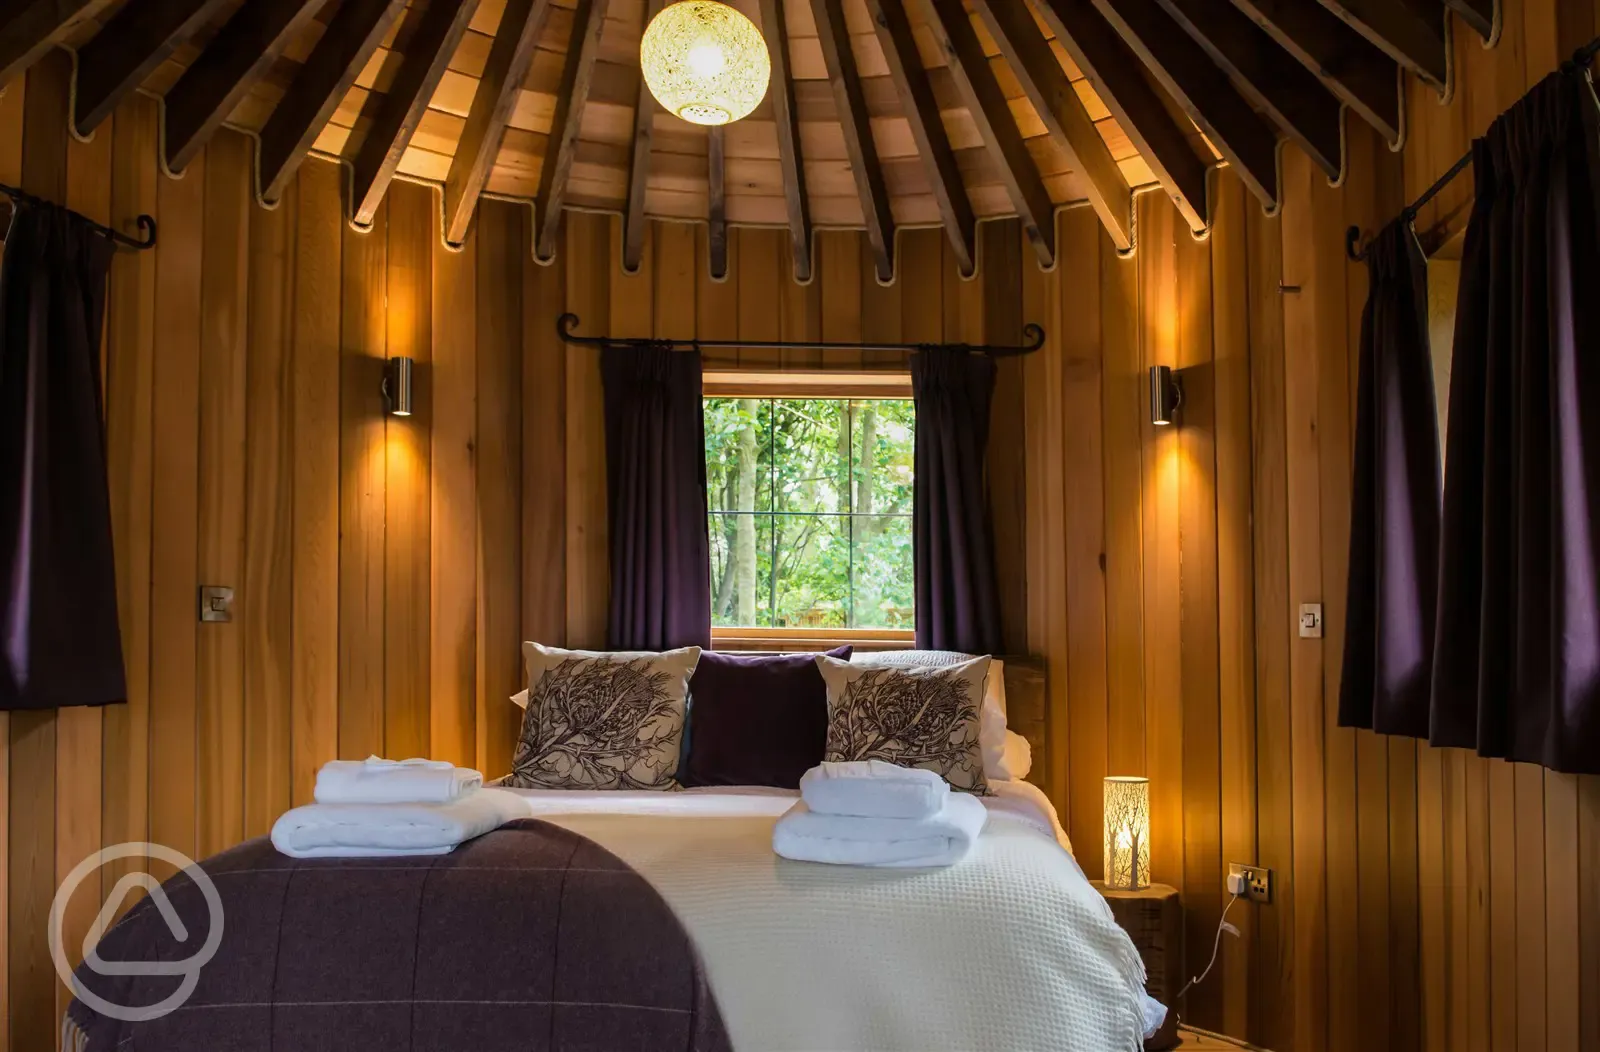 The bedroom in the treehouse